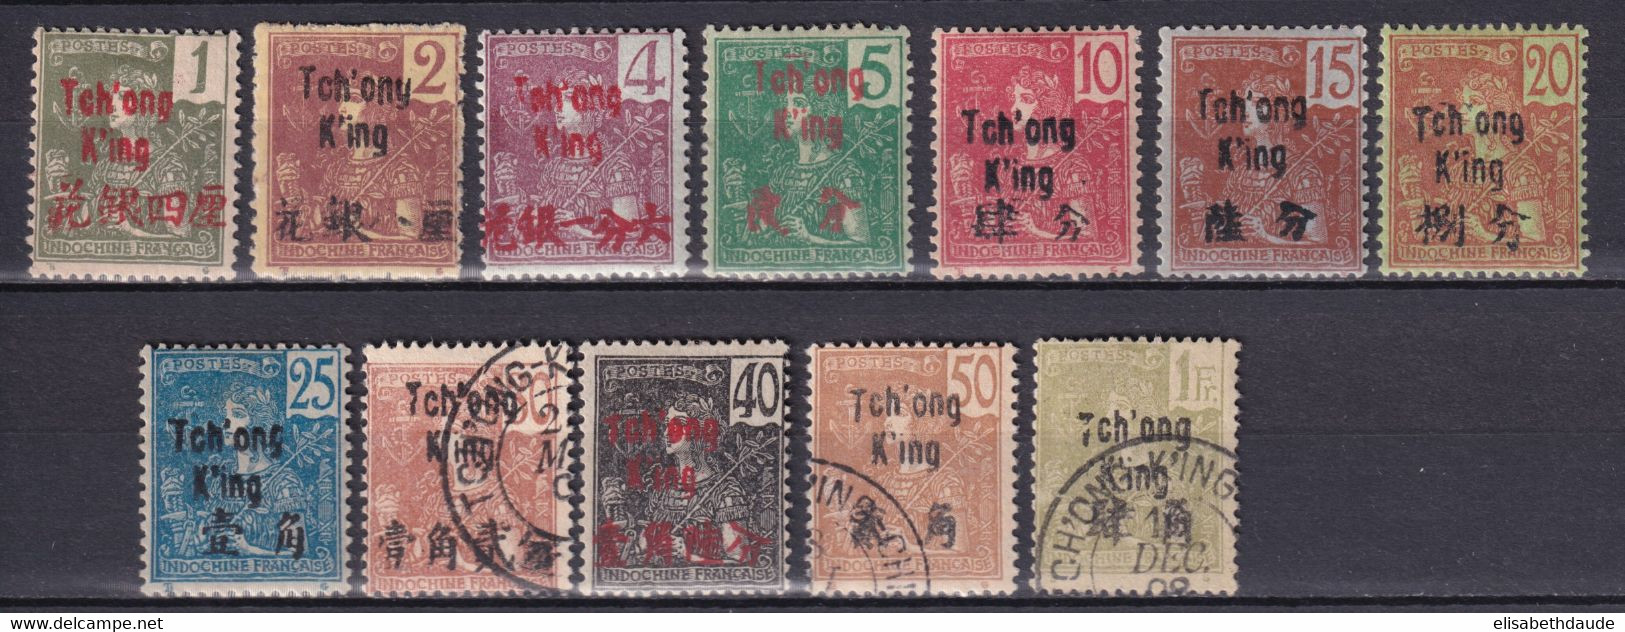 TCHONG KING  (CHINA) - YVERT N°48/56+58/59+61 */OBLITERES MH/Used - COTE 2015 = 97.5 EUR - - Ungebraucht